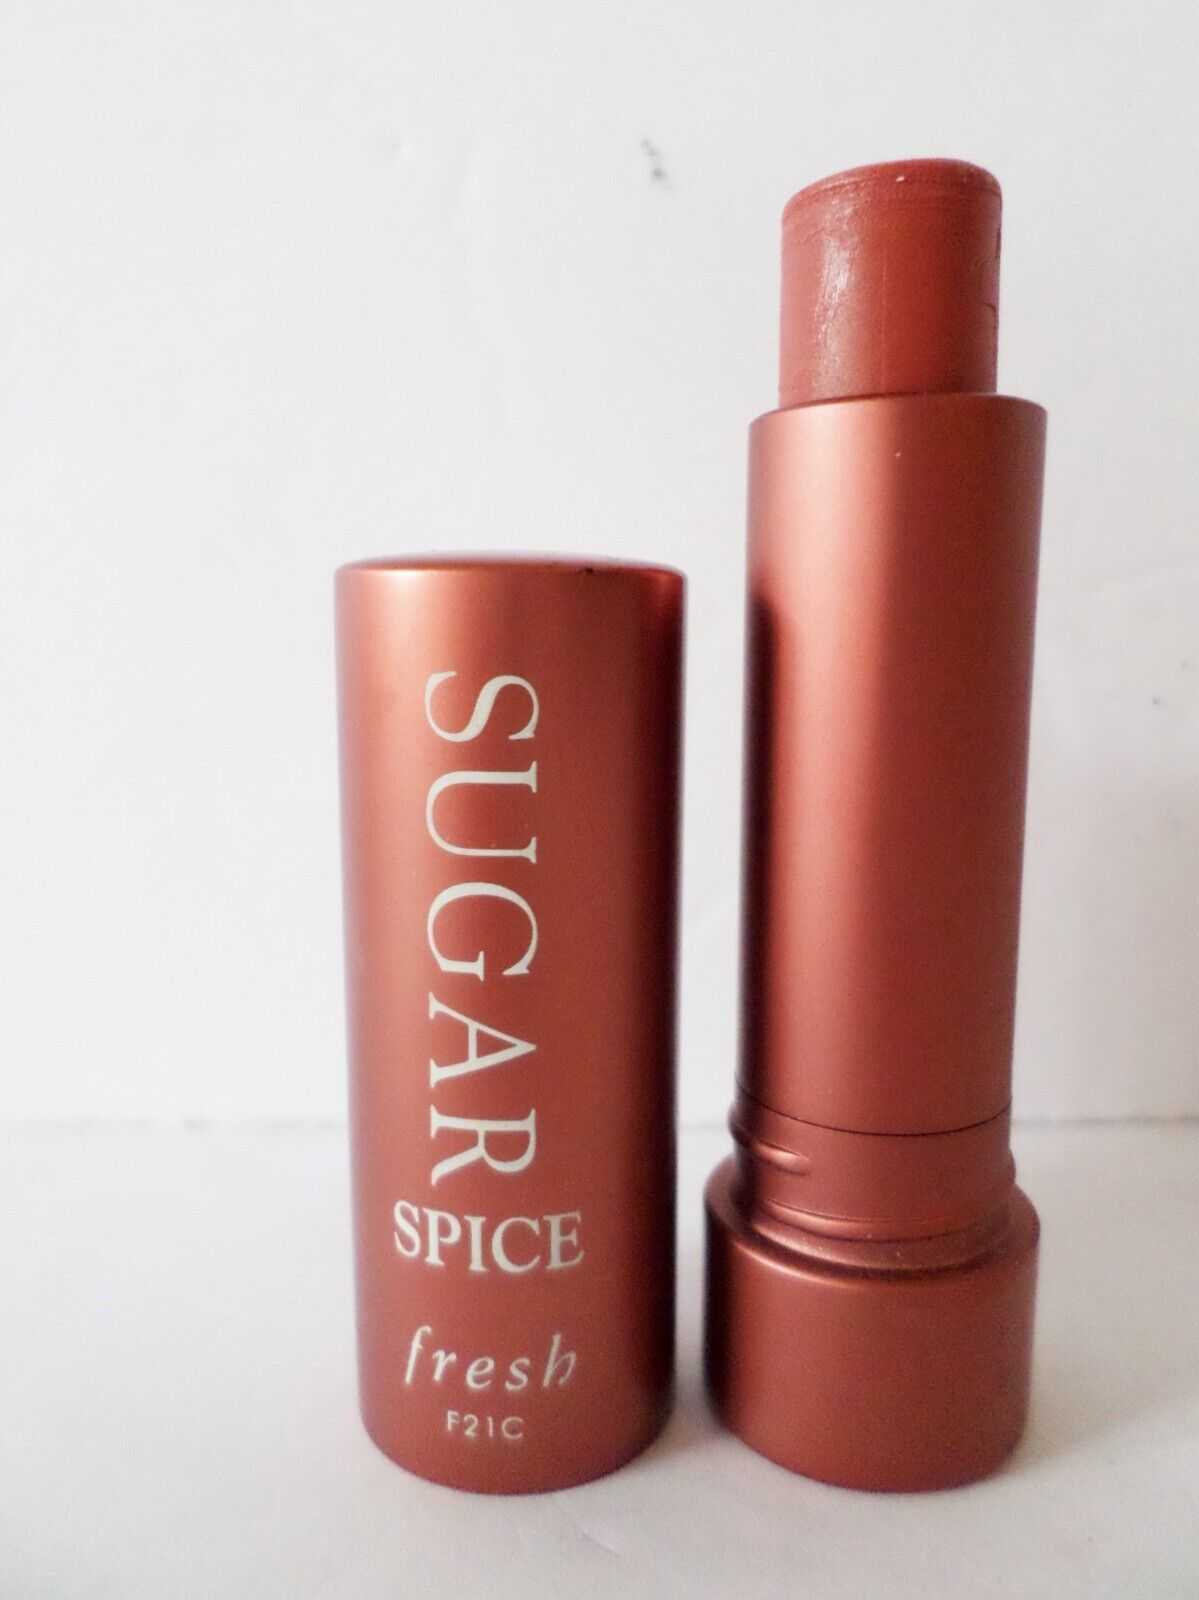 Primary image for Fresh-Sugar Spice-Tinted Lip Treatment-Spice-0.15 oz-NWOB